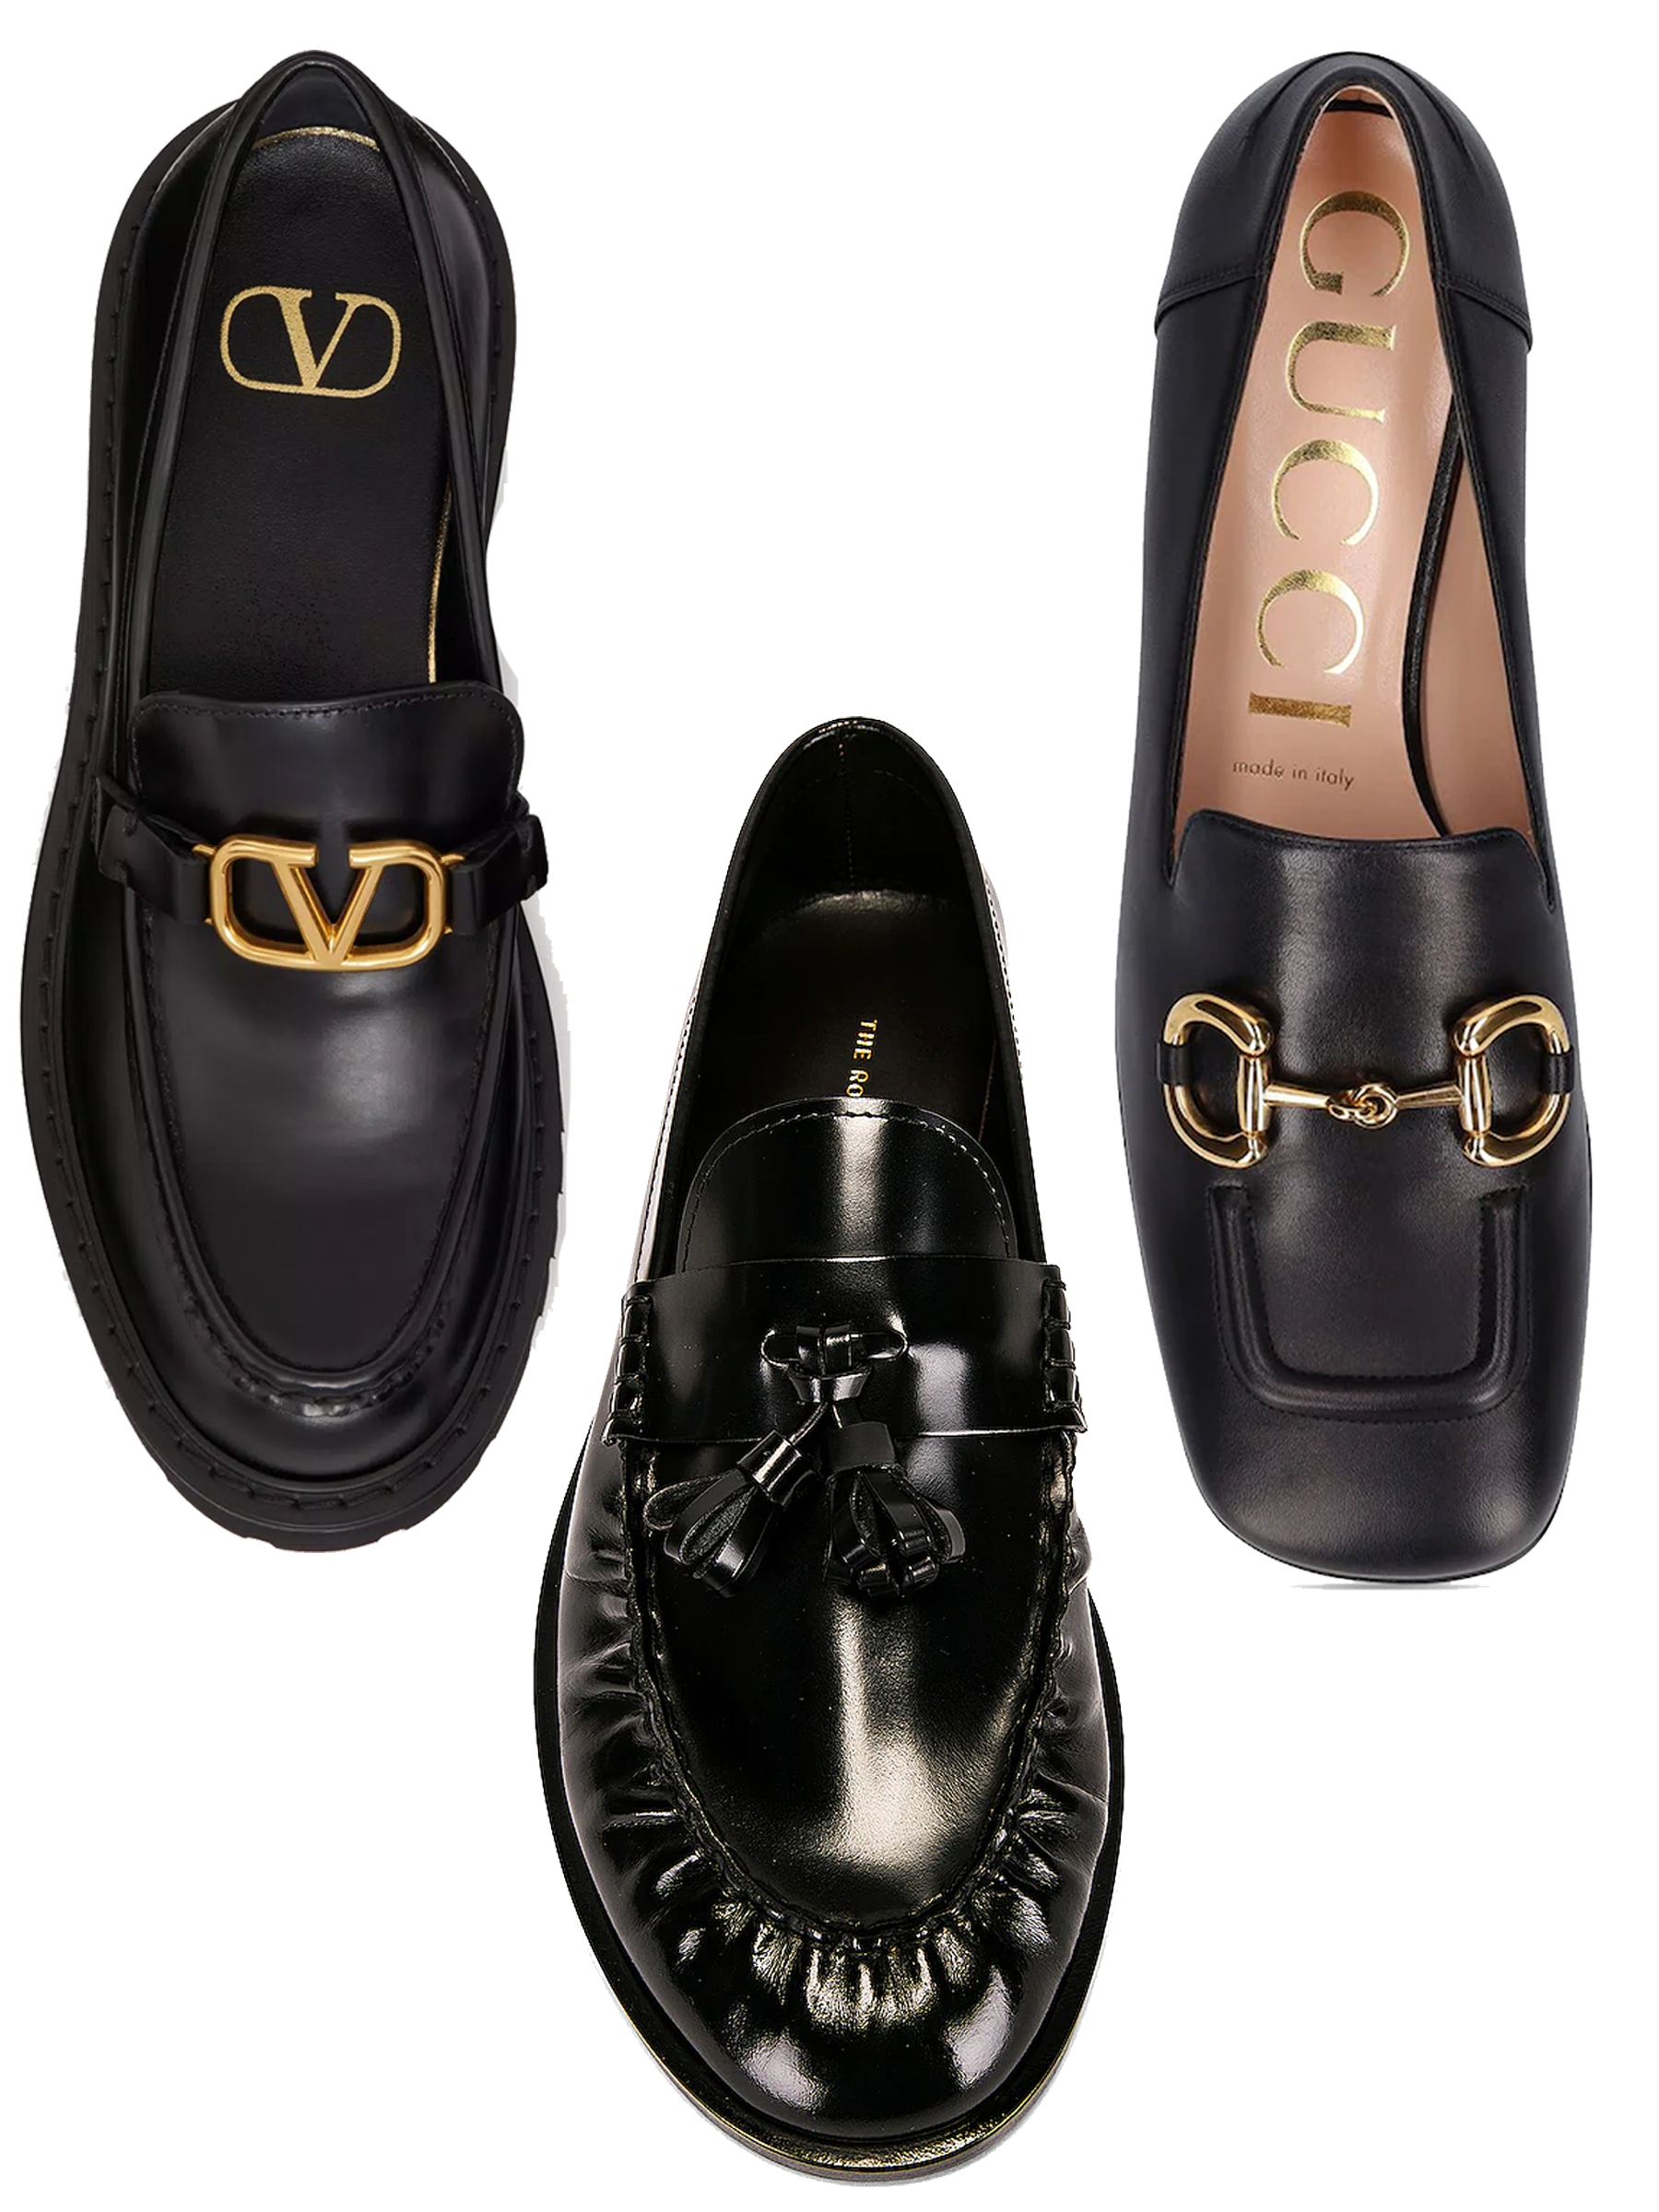 How to Get These Gucci Loafers That No One Else Will Have